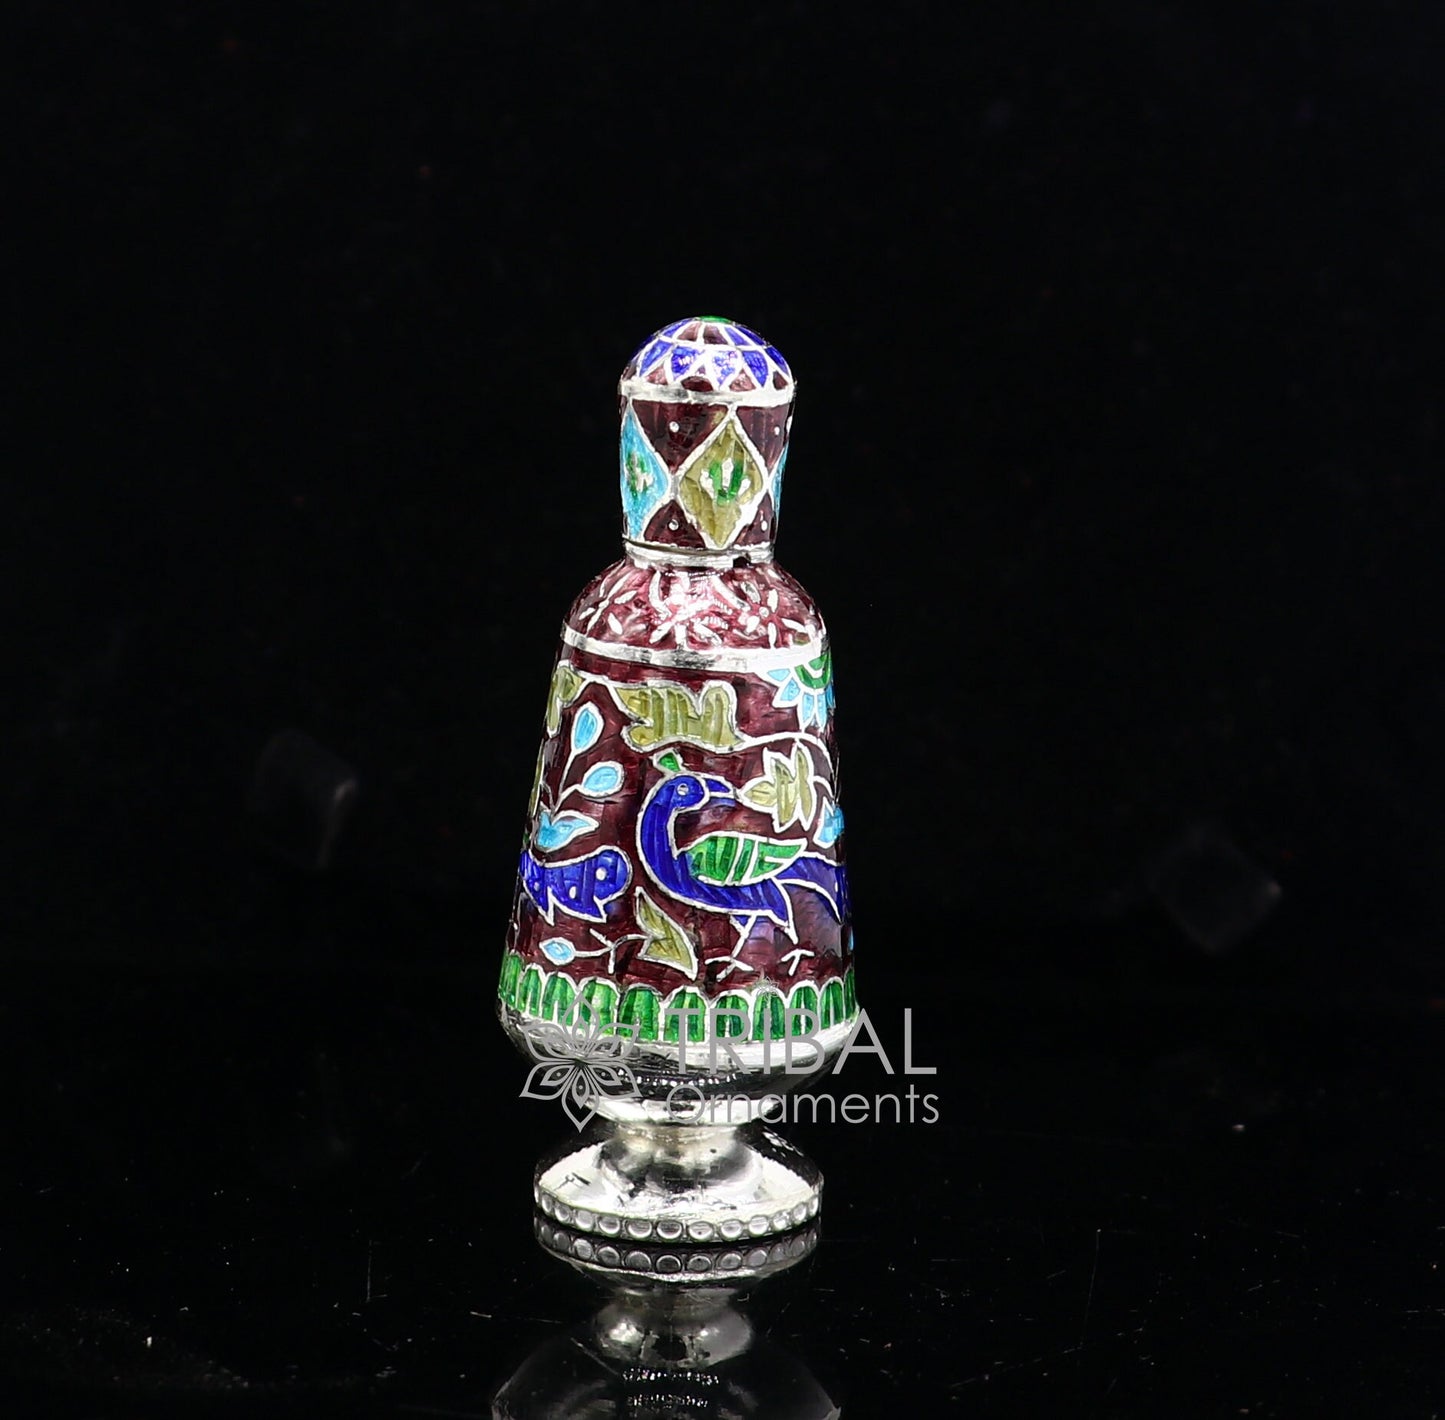 925 Sterling silver handmade fabulous trinket box, gorgeous container box, casket box, sindoor box, enamel work brides gifting box stb793 - TRIBAL ORNAMENTS